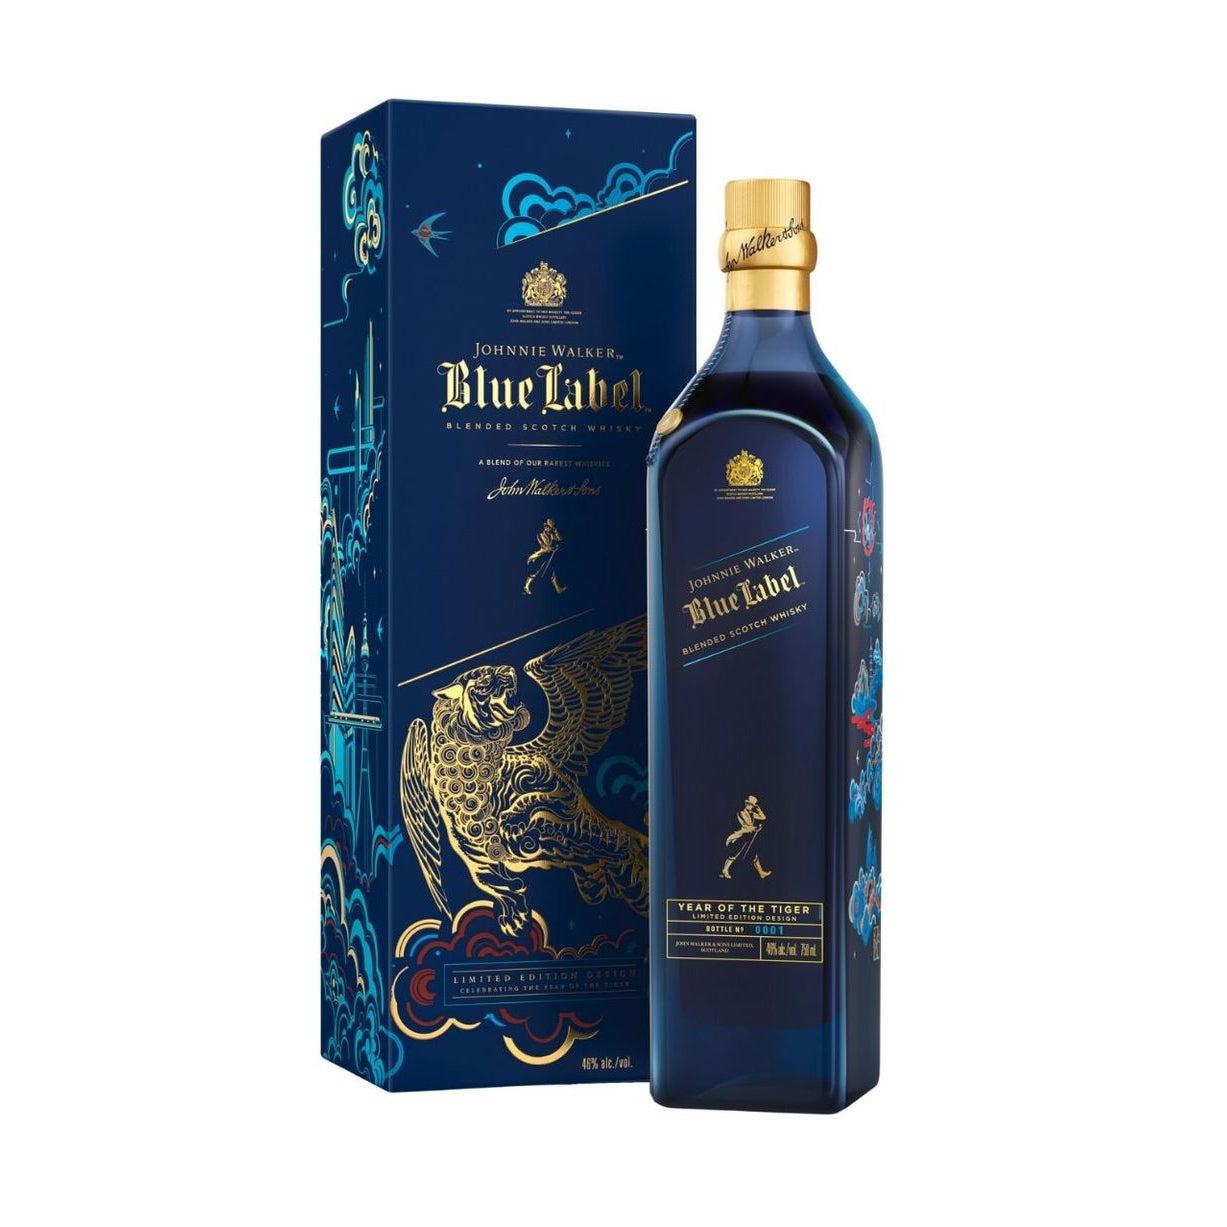 Johnnie Walker Blended Scotch Whisky Blue Label Year of the Tiger